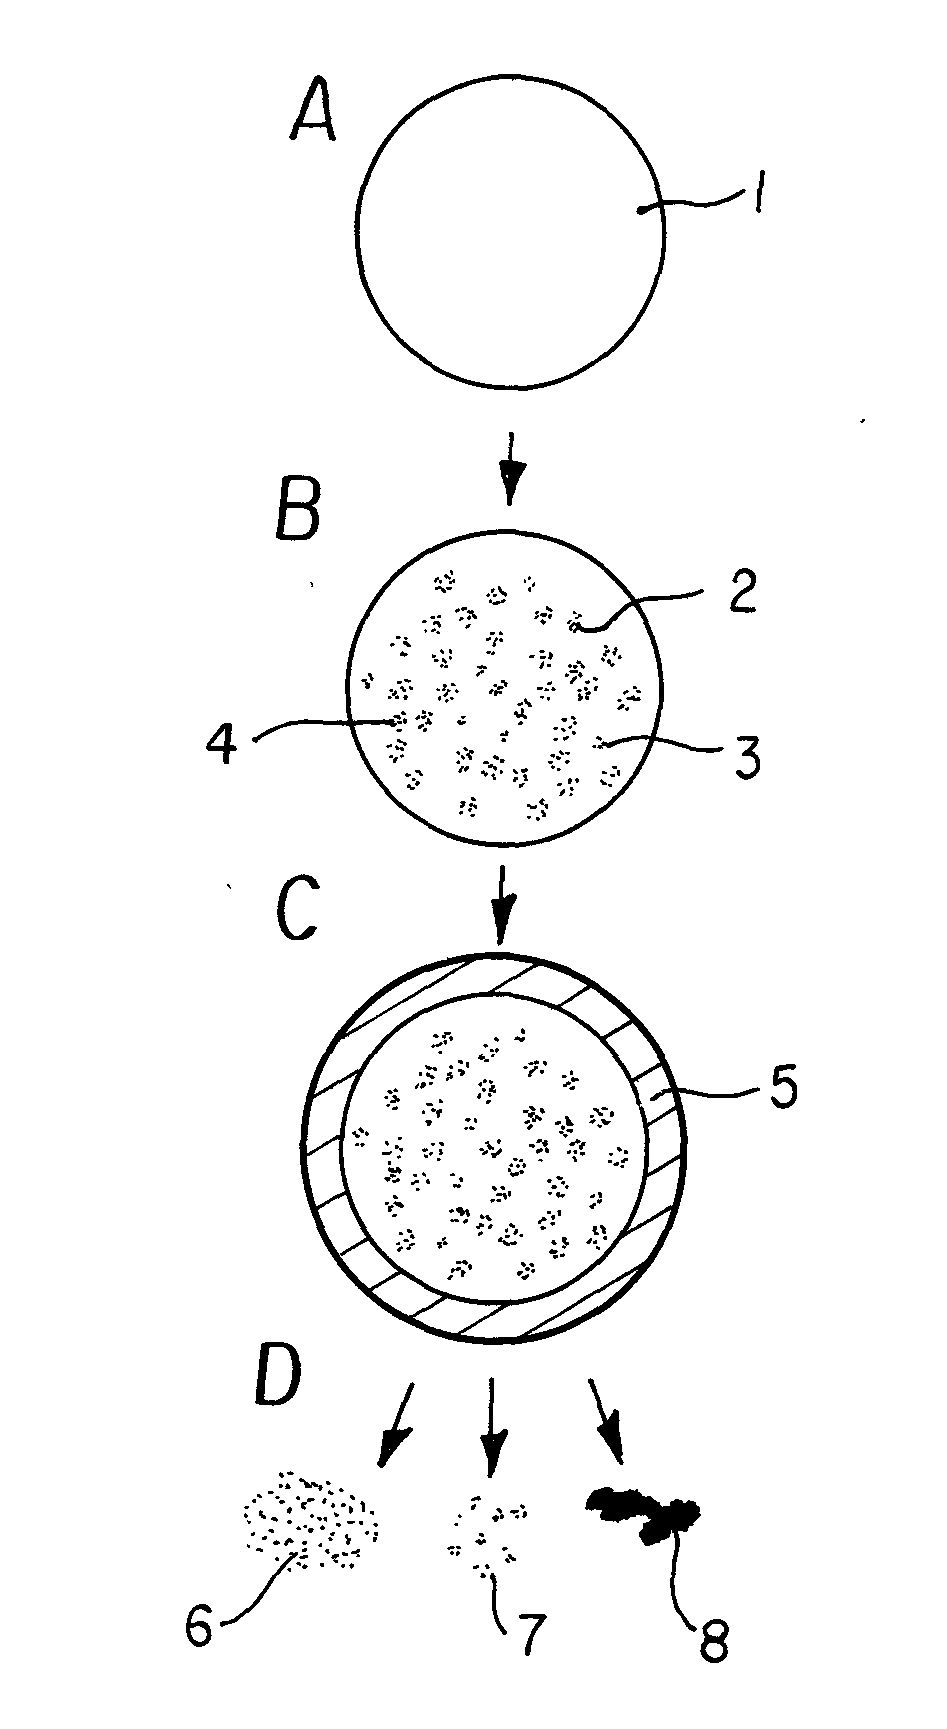 Carbide-derived-carbon-based oxygen carriers